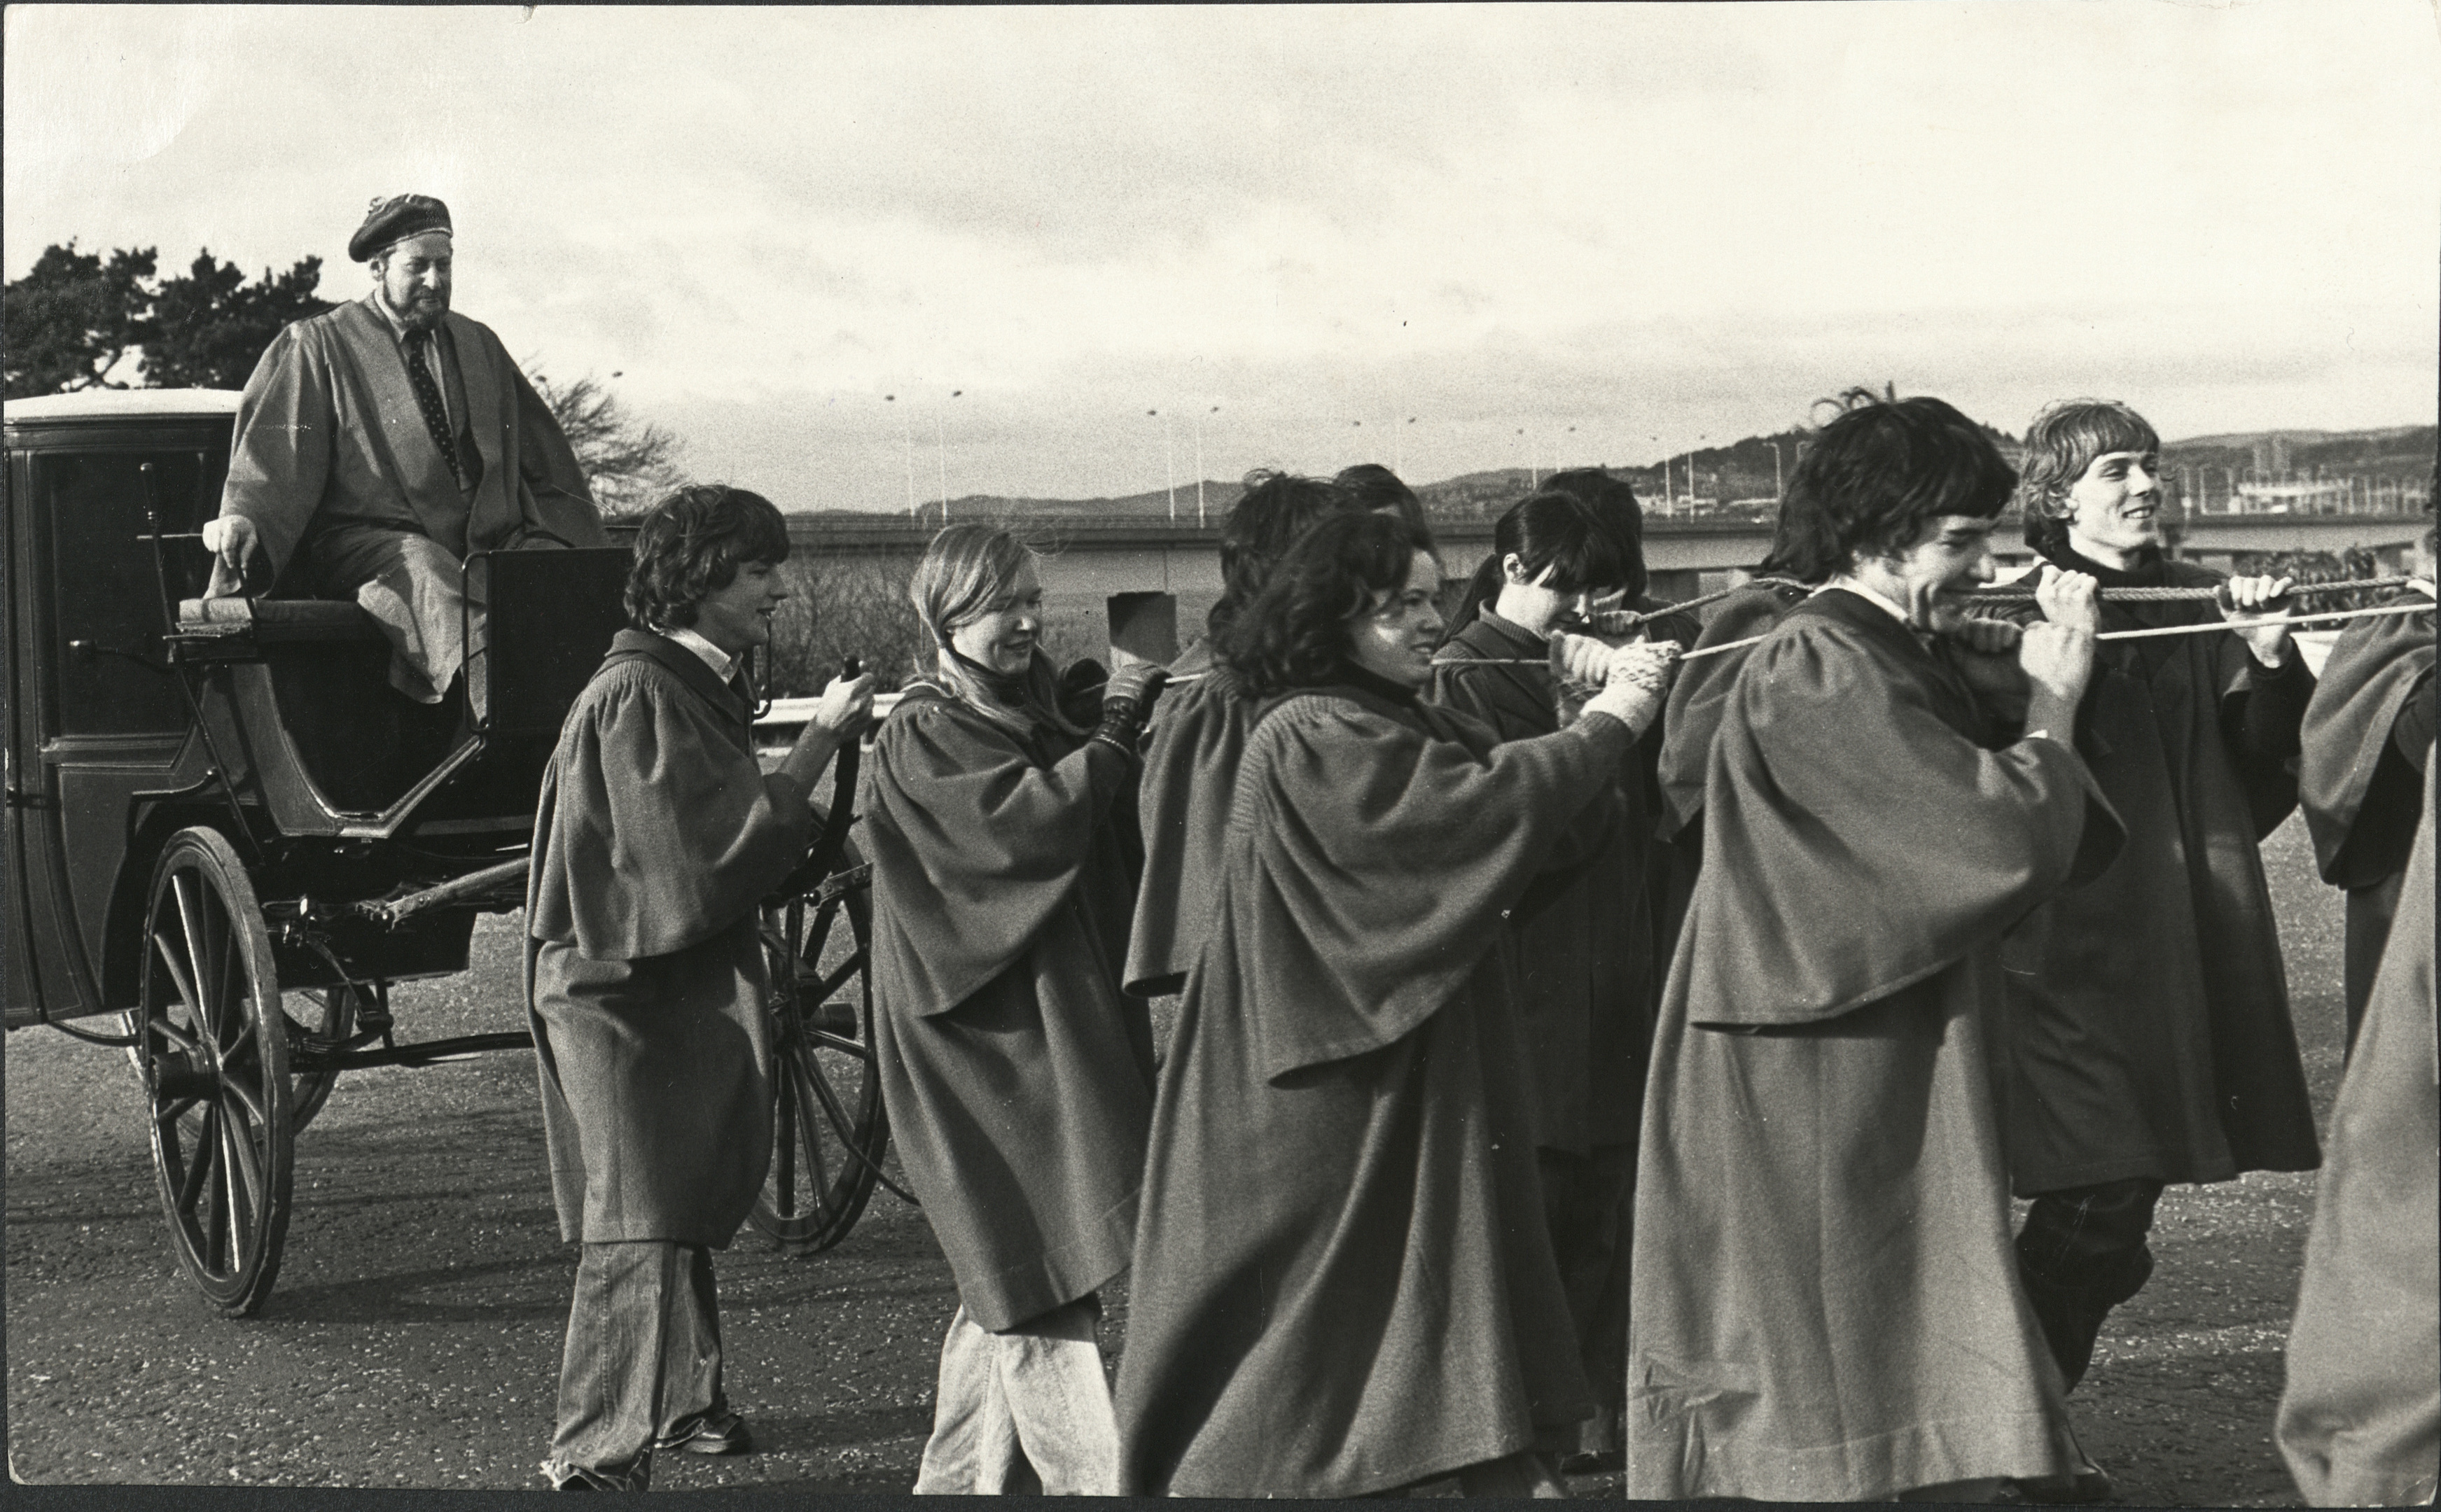 Clement Freud being hauled over the Tay Road Bridge in a carriage by students of Dundee University in 1977.